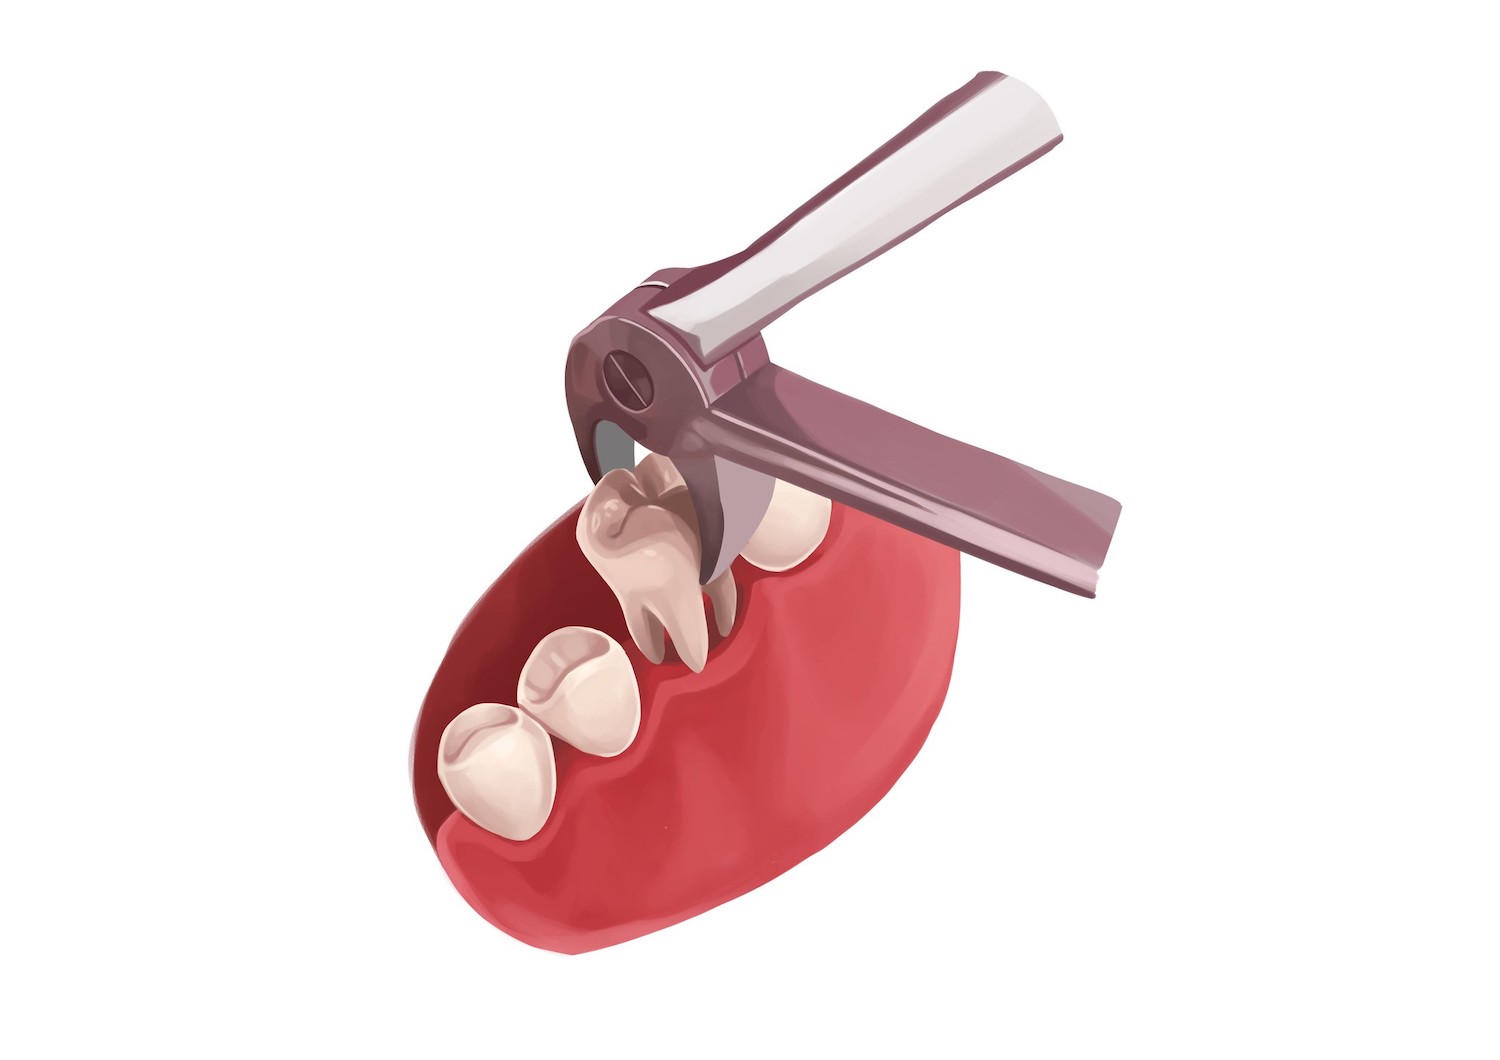 Illustration of special dental tools extracting a tooth